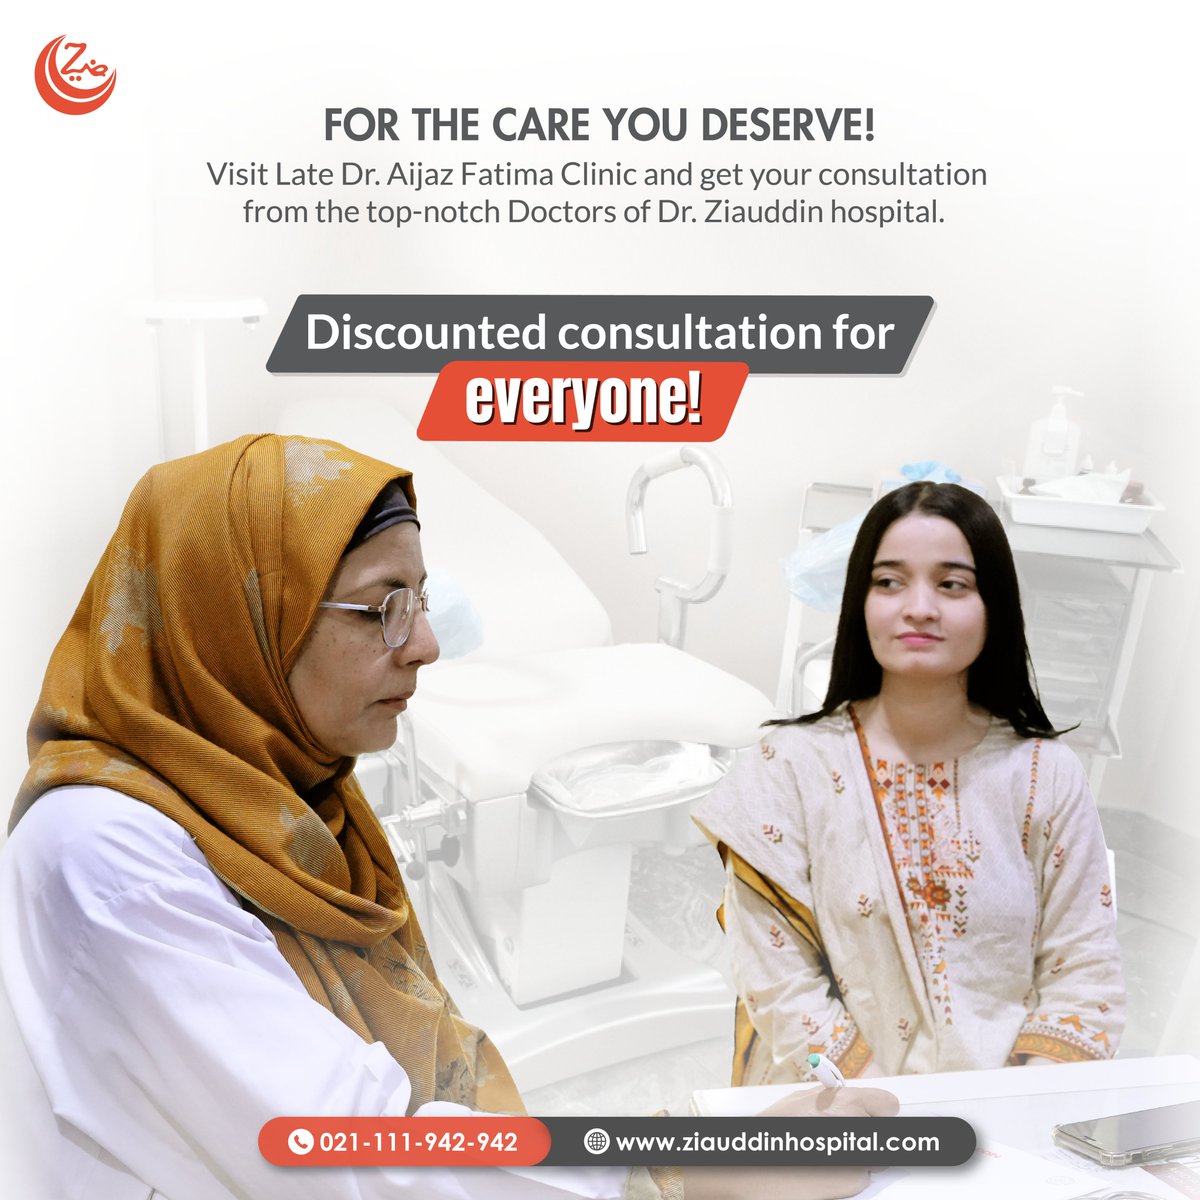 Keeping the traditions alive #DrZiauddinHospital is working for creating a positive impact on women’s health services. 
To book an appointment, visit ziauddinhospital.com/make-an-appoin… contact us at 021-111-942-942 or WhatsApp us at 0321-3660249
#ziauddinhospital #gynecologist #mothercare